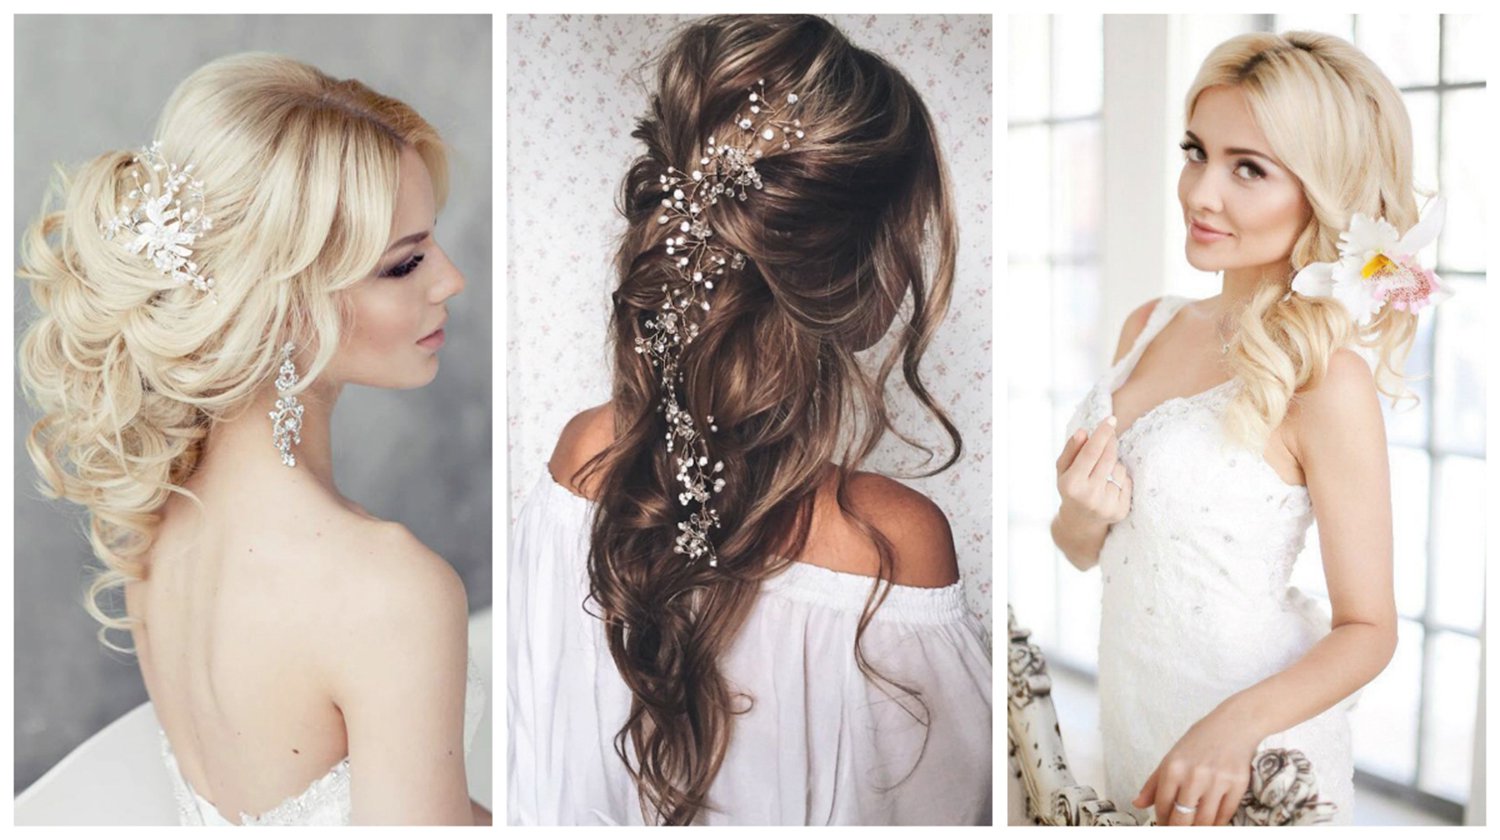 mad Snor broderi 33 Wedding Hairstyles You Will Absolutely Love | The Best Wedding Dresses